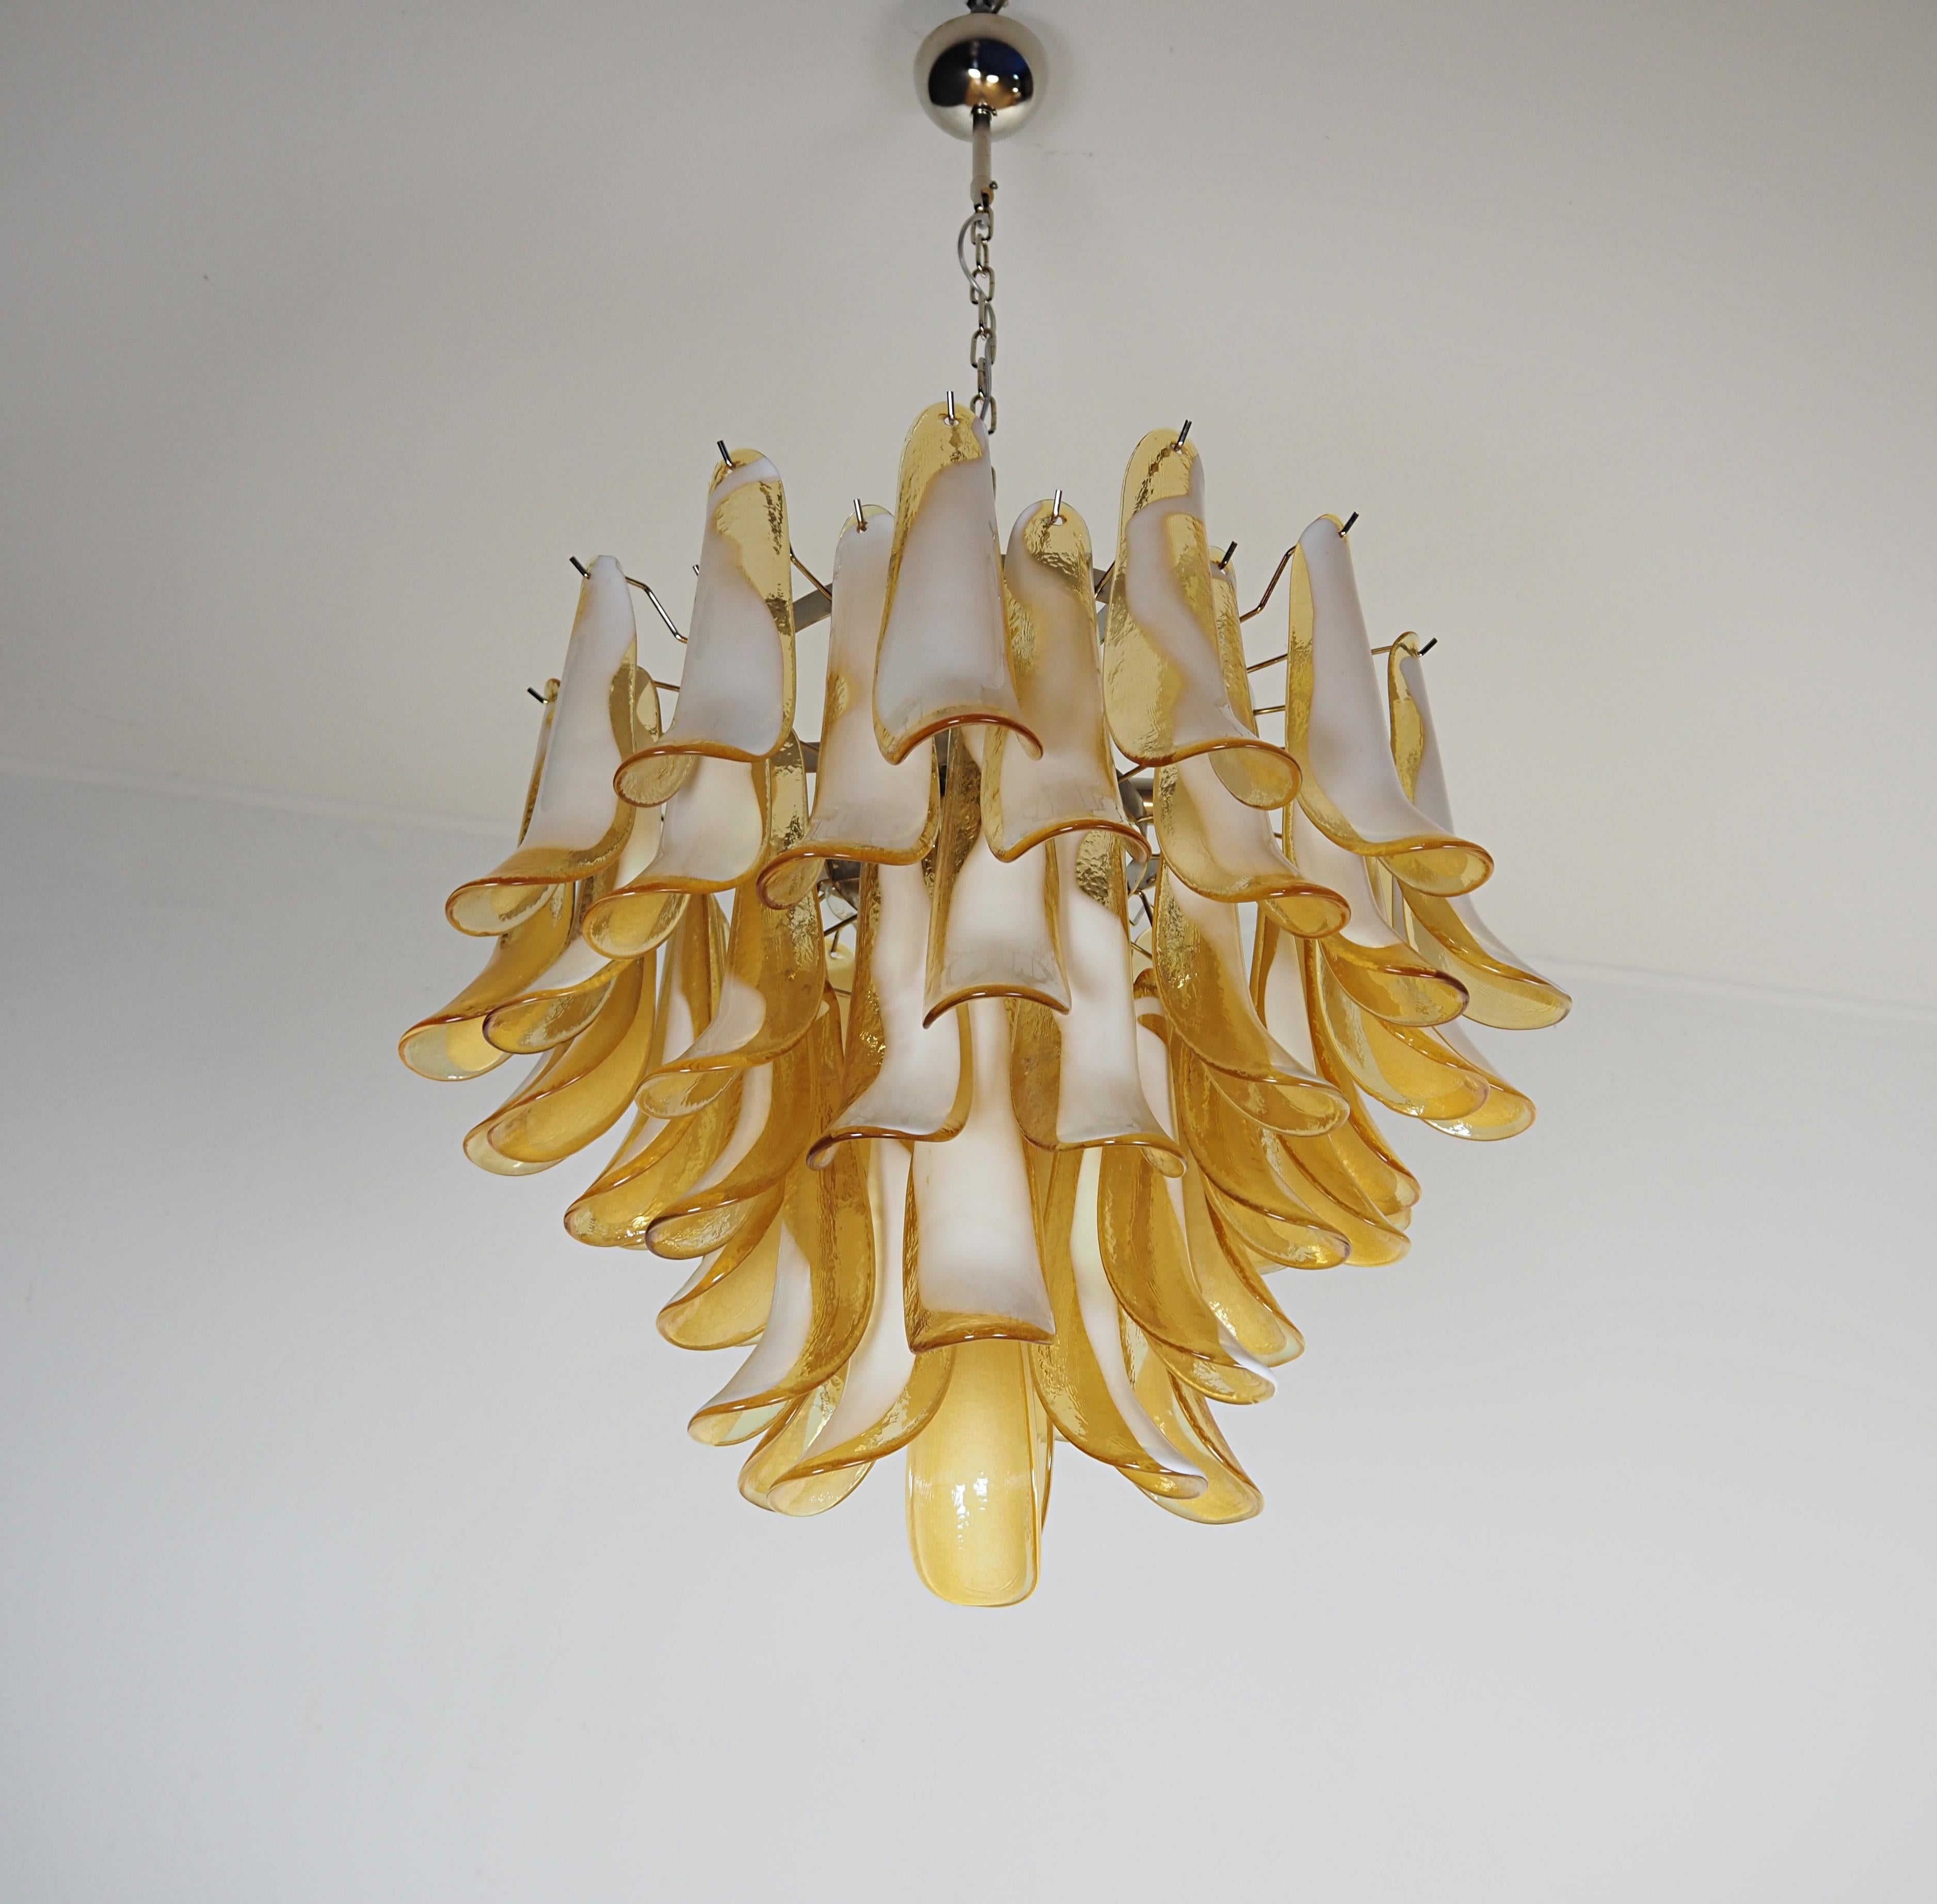  Italian Caramello Petal Chandelier, Murano In Excellent Condition For Sale In Budapest, HU